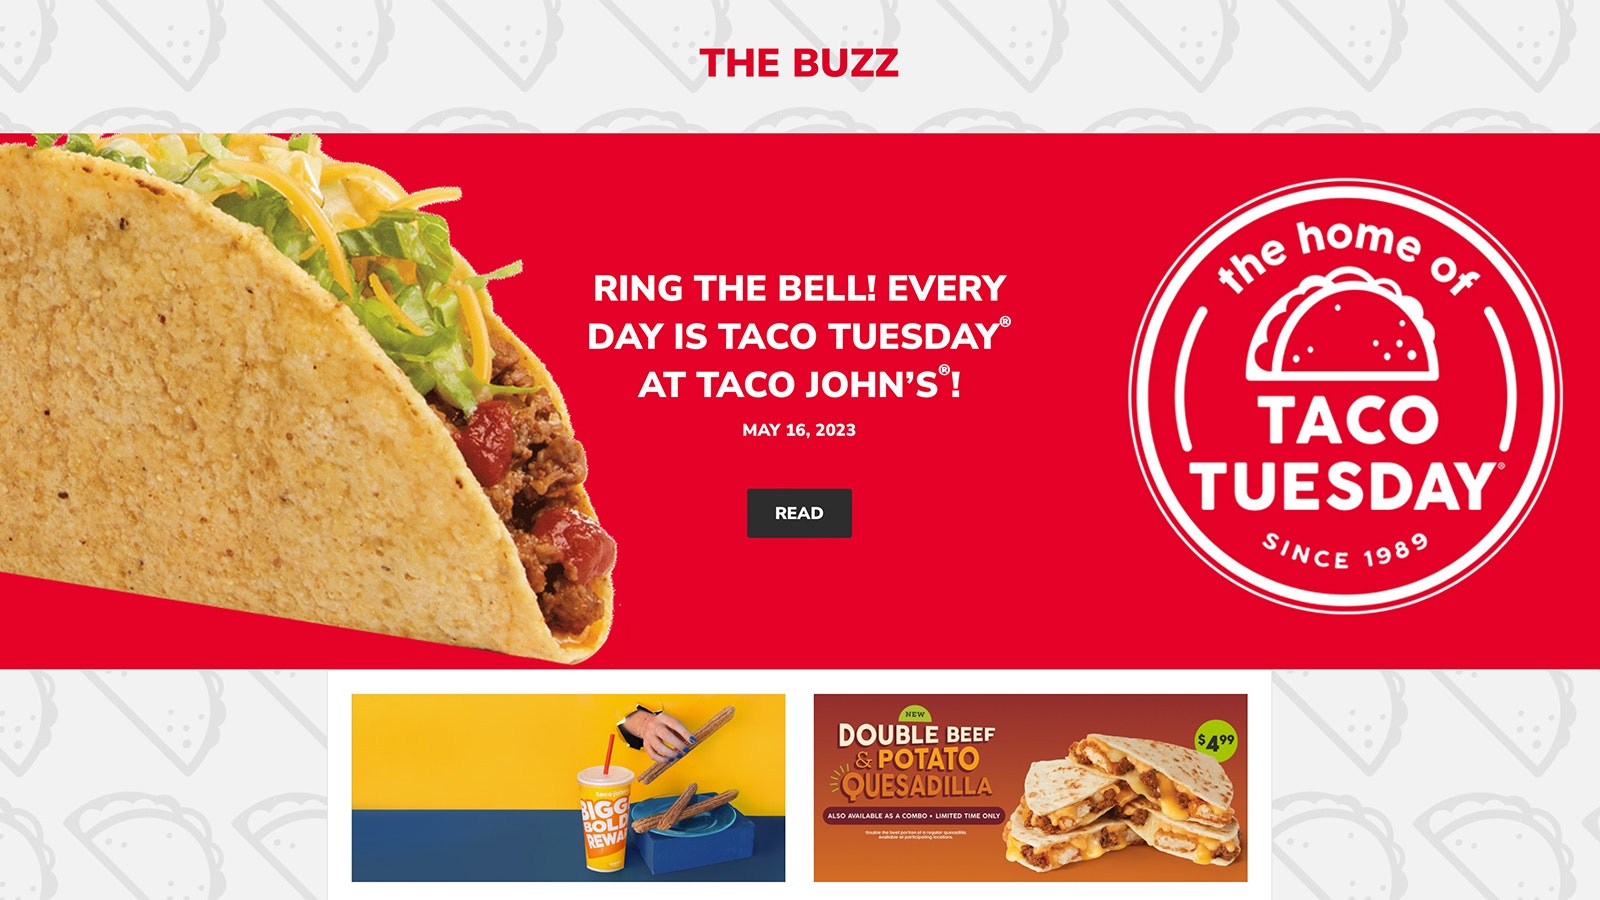 Taco John's prominently displays on its website that it's been "the home of Taco Tuesday since 1989."